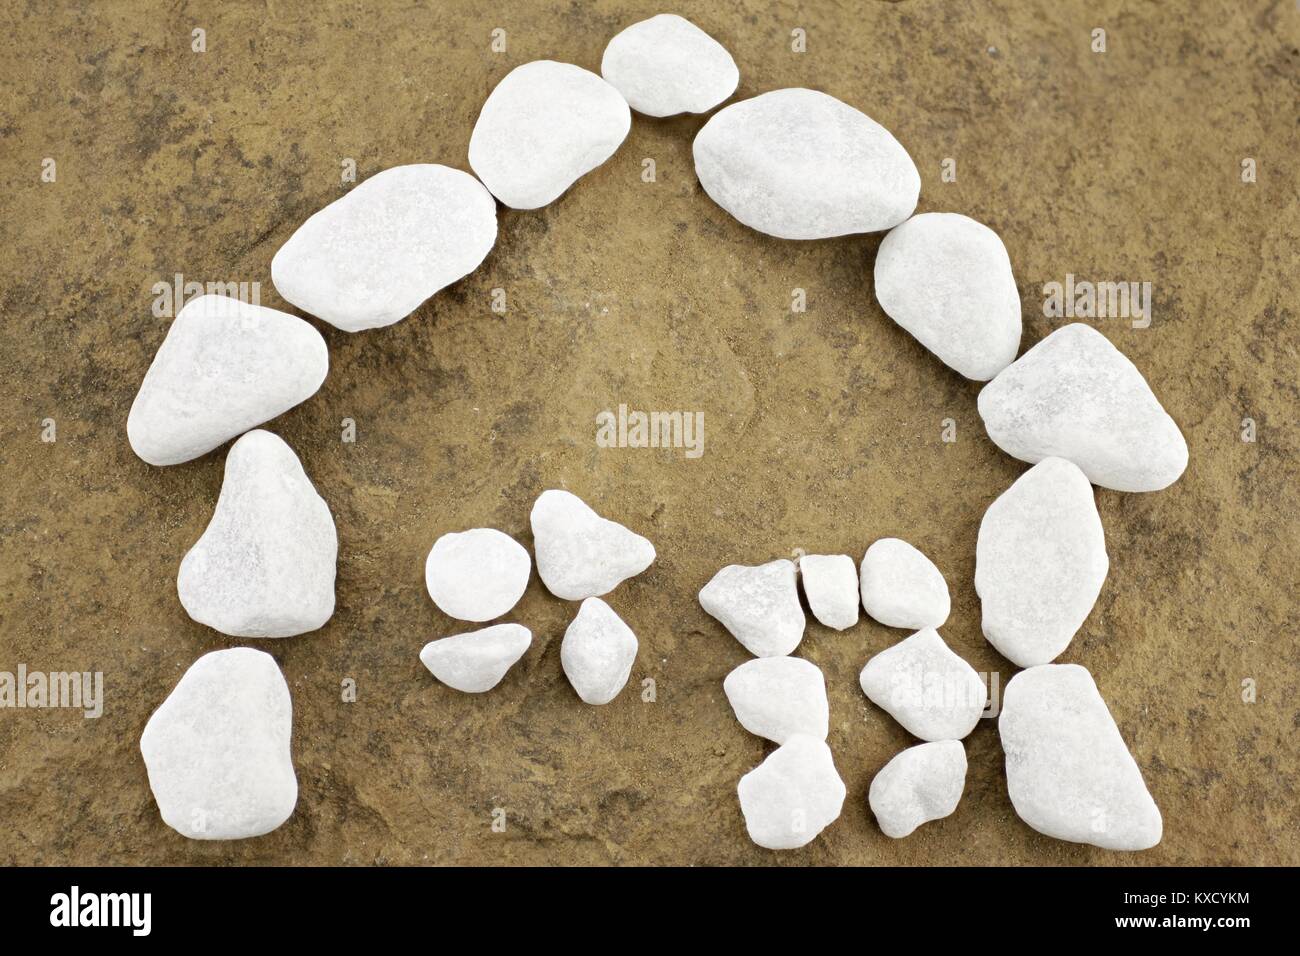 little house made of white pebbles in front of brown stone Stock Photo